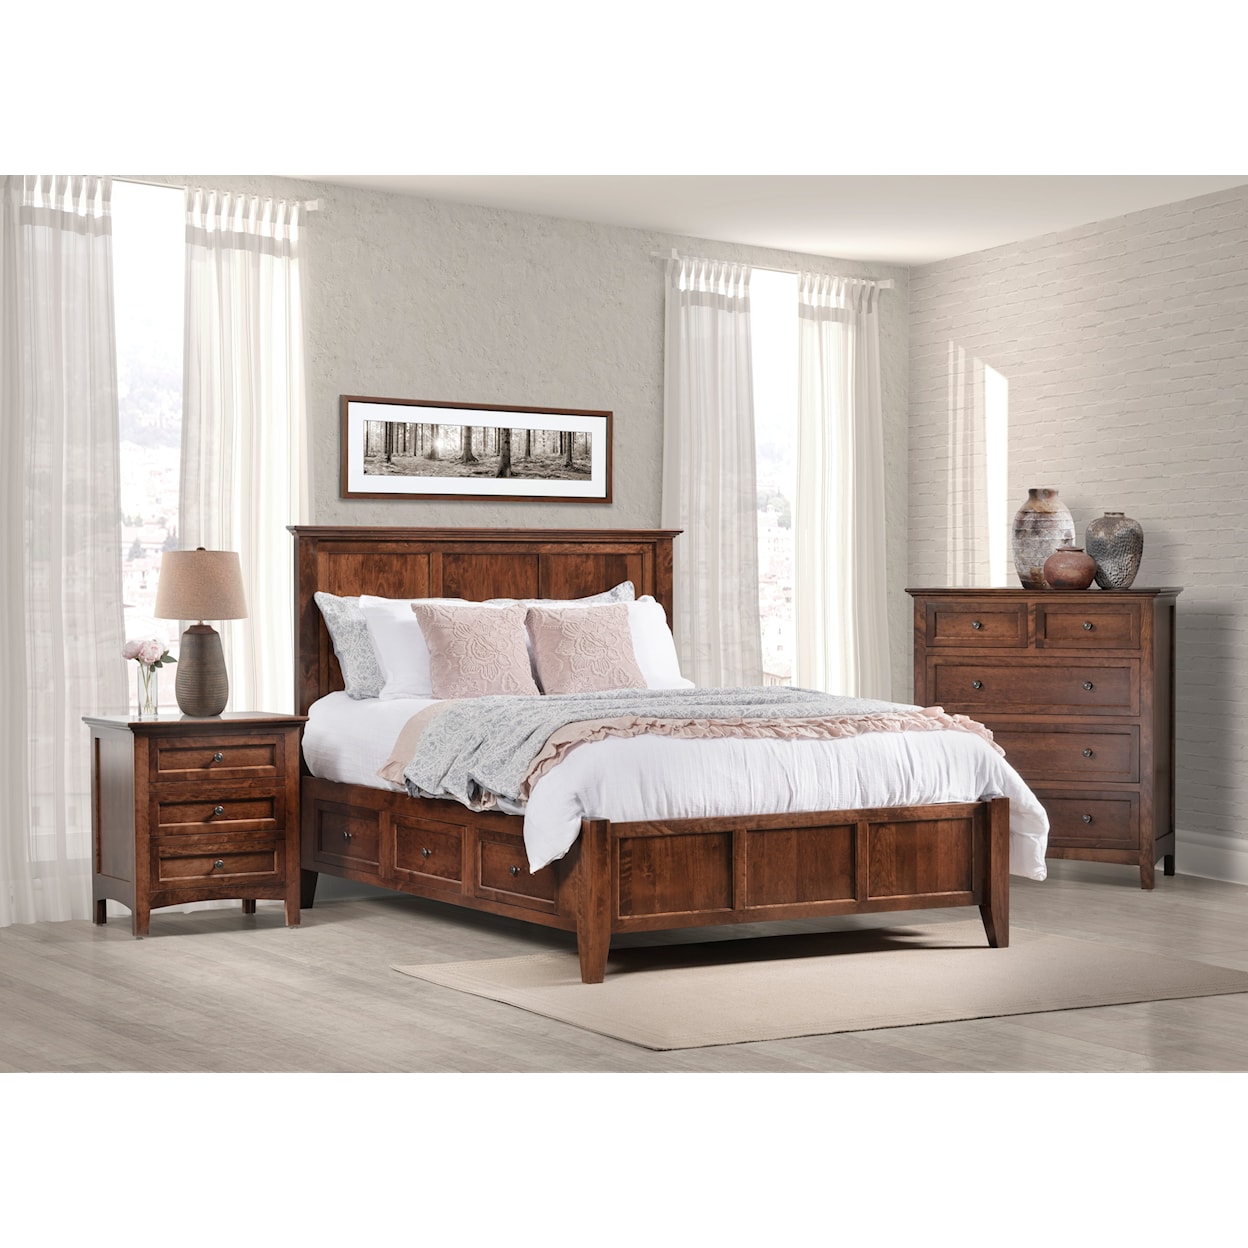 Millcraft Albany 3-Piece Full Bedroom Group